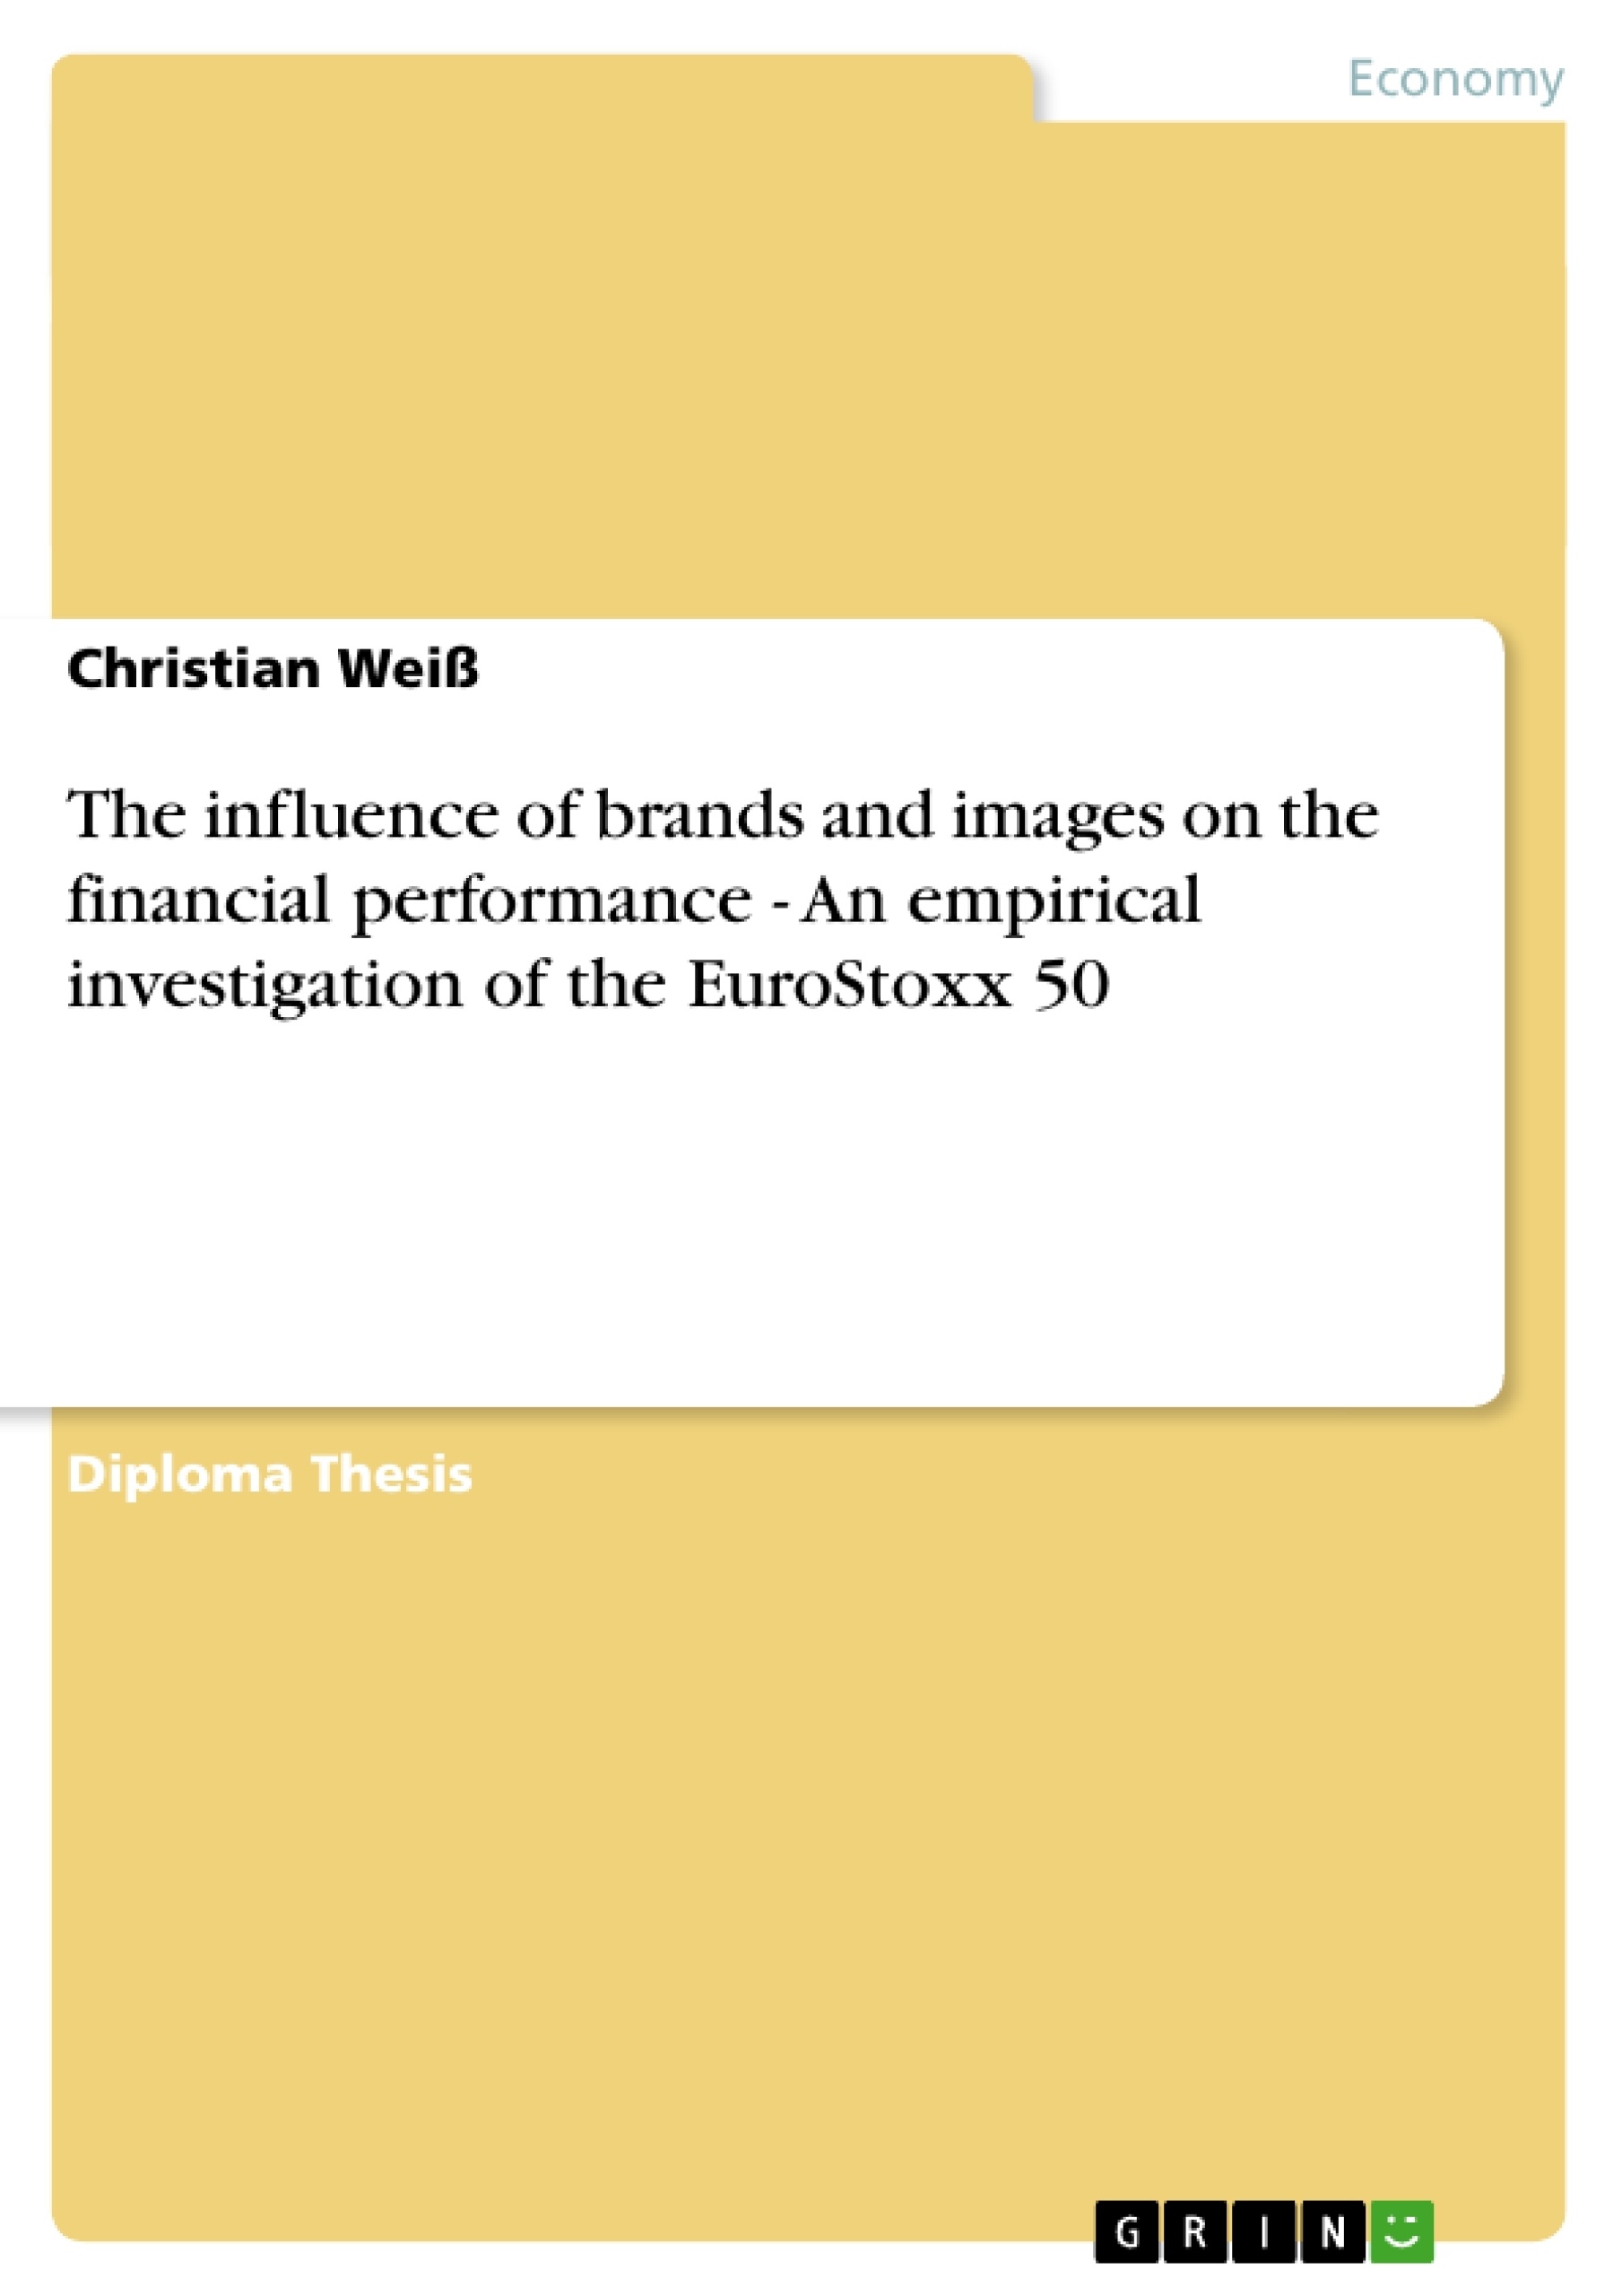 Titre: The influence of brands and images on the financial performance - An empirical investigation of the EuroStoxx 50